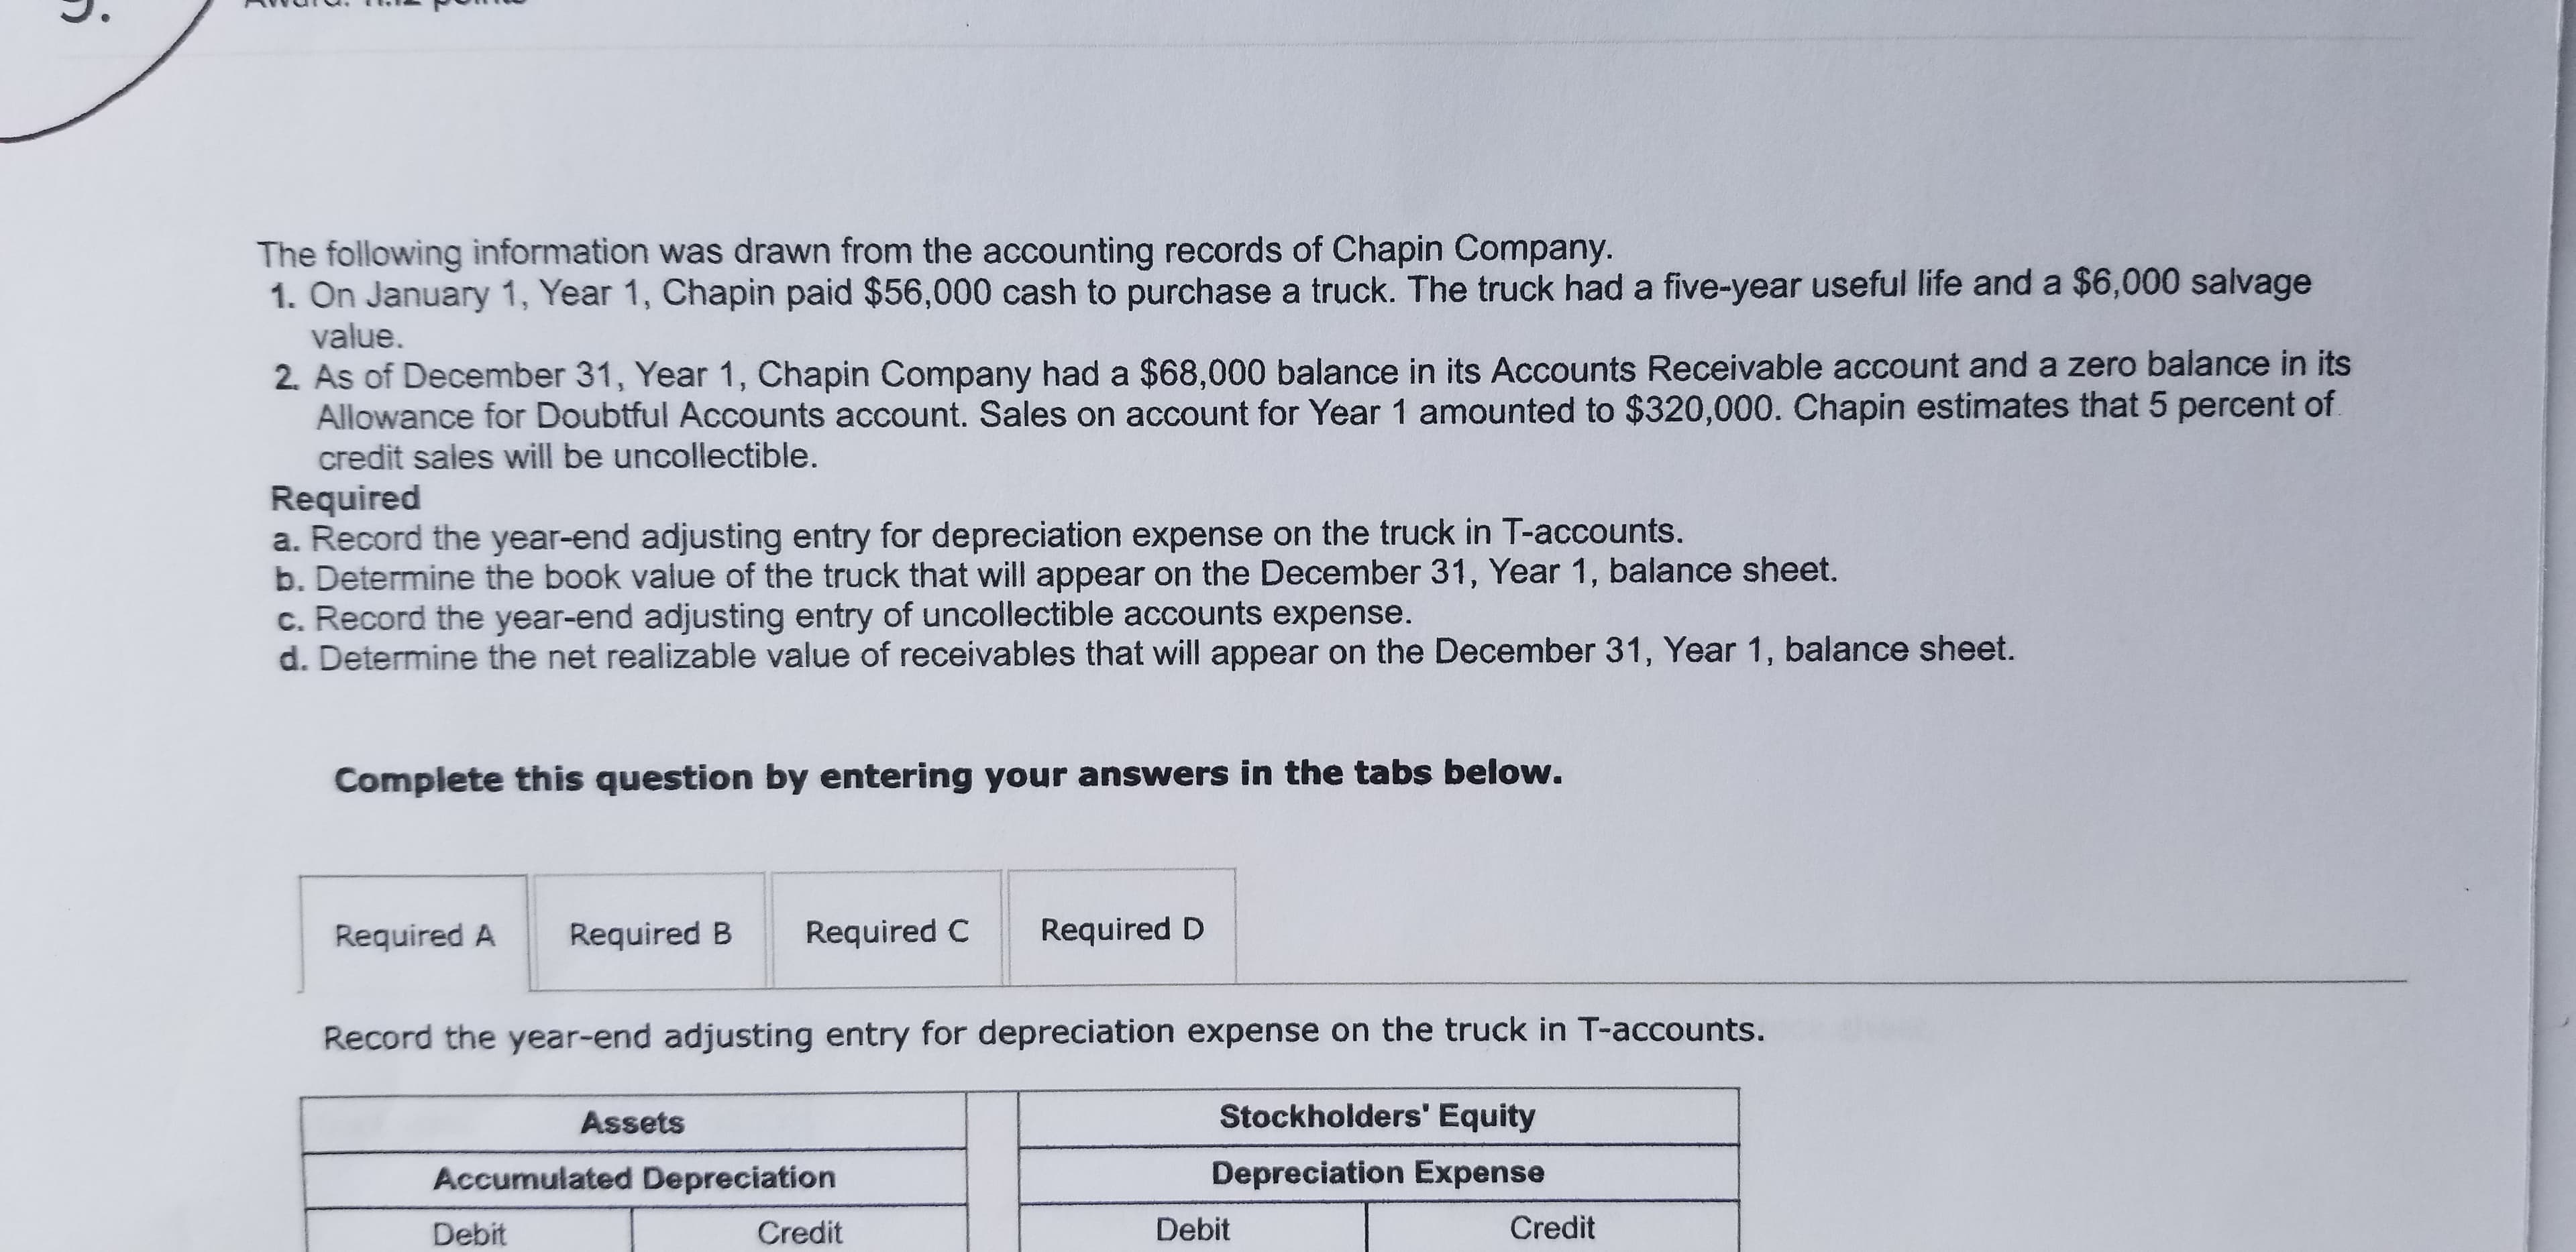 The following information was drawn from the accounting records of Chapin Company.
1. On January 1, Year 1, Chapin paid $56,000 cash to purchase a truck. The truck had a five-year useful life and a $6,000 salvage
value.
2. As of December 31, Year 1, Chapin Company had a $68,000 balance in its Accounts Receivable account and a zero balance in its
Allowance for Doubtful Accounts account. Sales on account for Year 1 amounted to $320,000. Chapin estimates that 5 percent of
credit sales will be uncollectible.
Required
a. Record the year-end adjusting entry for depreciation expense on the truck in T-accounts.
b. Determine the book value of the truck that will appear on the December 31, Year 1, balance sheet.
c. Record the year-end adjusting entry of uncollectible accounts expense.
d. Determine the net realizable value of receivables that will appear on the December 31, Year 1, balance sheet.
Complete this question by entering your answers in the tabs below.
Required A
Required B
Required C
Required D
Record the year-end adjusting entry for depreciation expense on the truck in T-accounts.
Assets
Stockholders' Equity
Accumulated Depreciation
Depreciation Expense
Debit
Credit
Debit
Credit
i.
